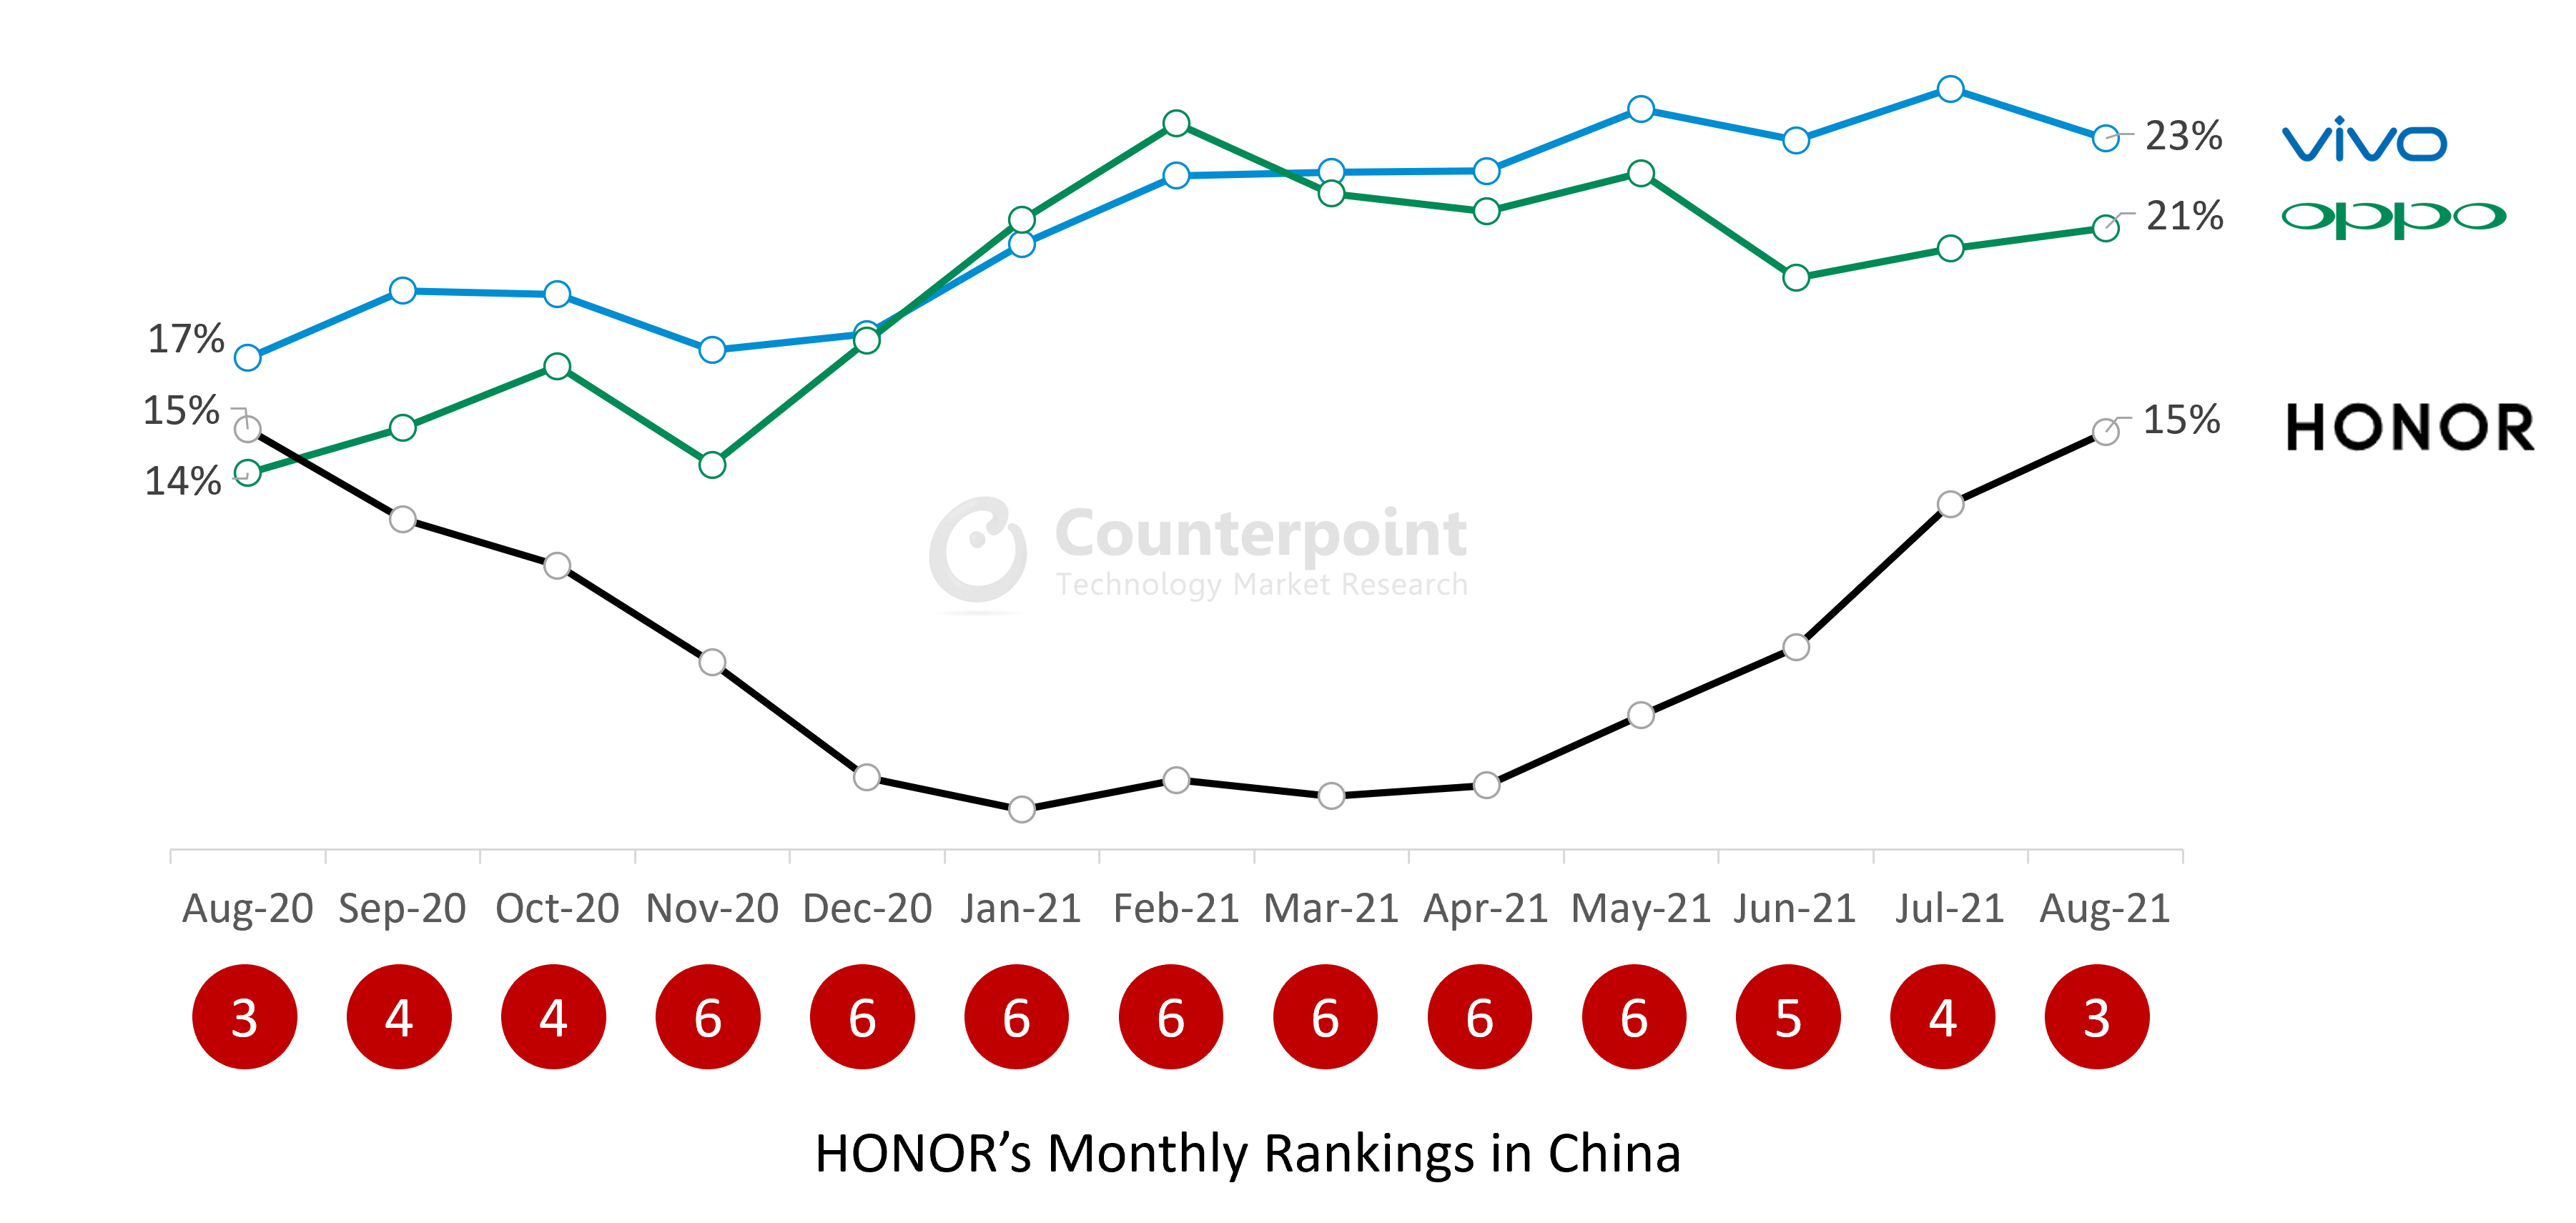 China Smartphone Sales: Top 3 Brands’ Share in August 2021 and HONOR Rankings